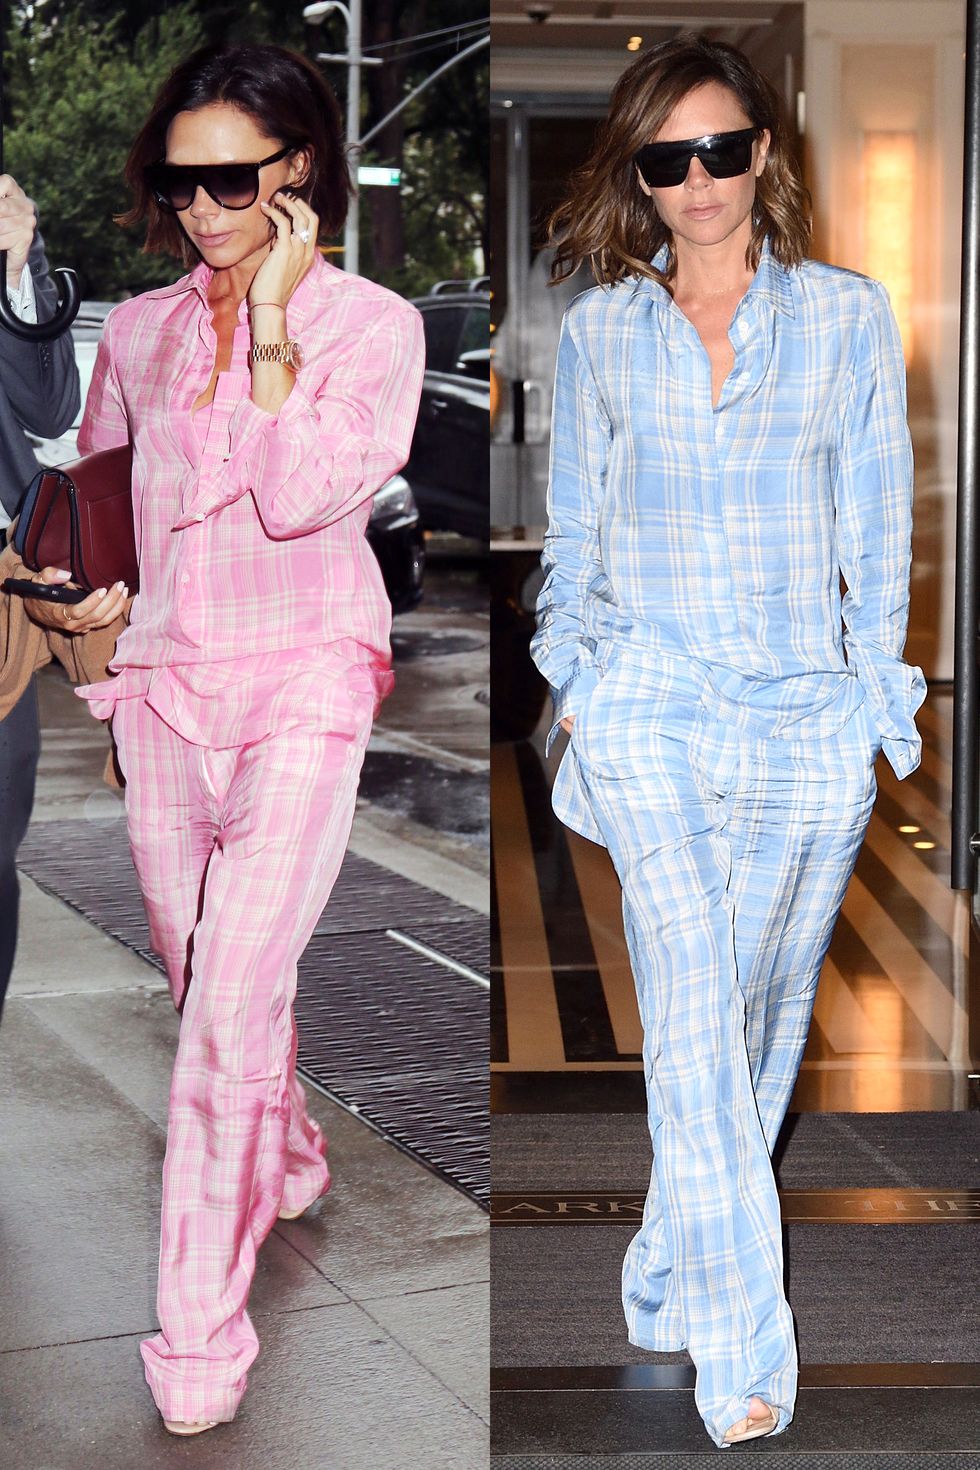 Pajama Fashion: Stars Who Basically Just Wore PJs to Hollywood Events